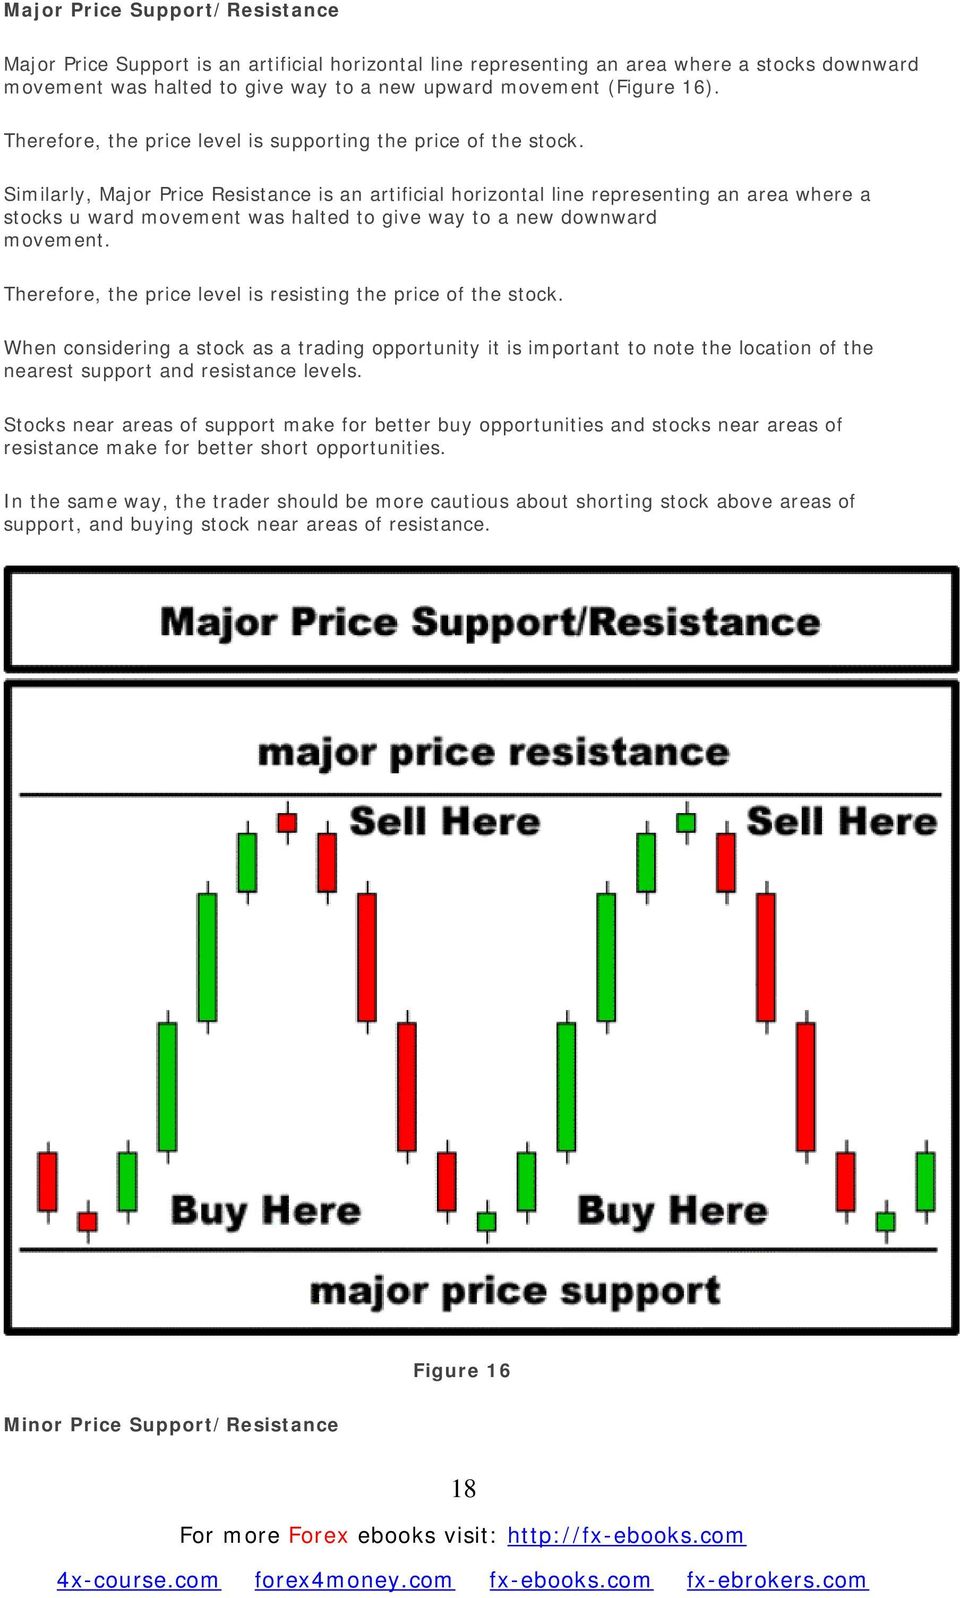 Similarly, Major Price Resistance is an artificial horizontal line representing an area where a stocks u ward movement was halted to give way to a new downward movement.